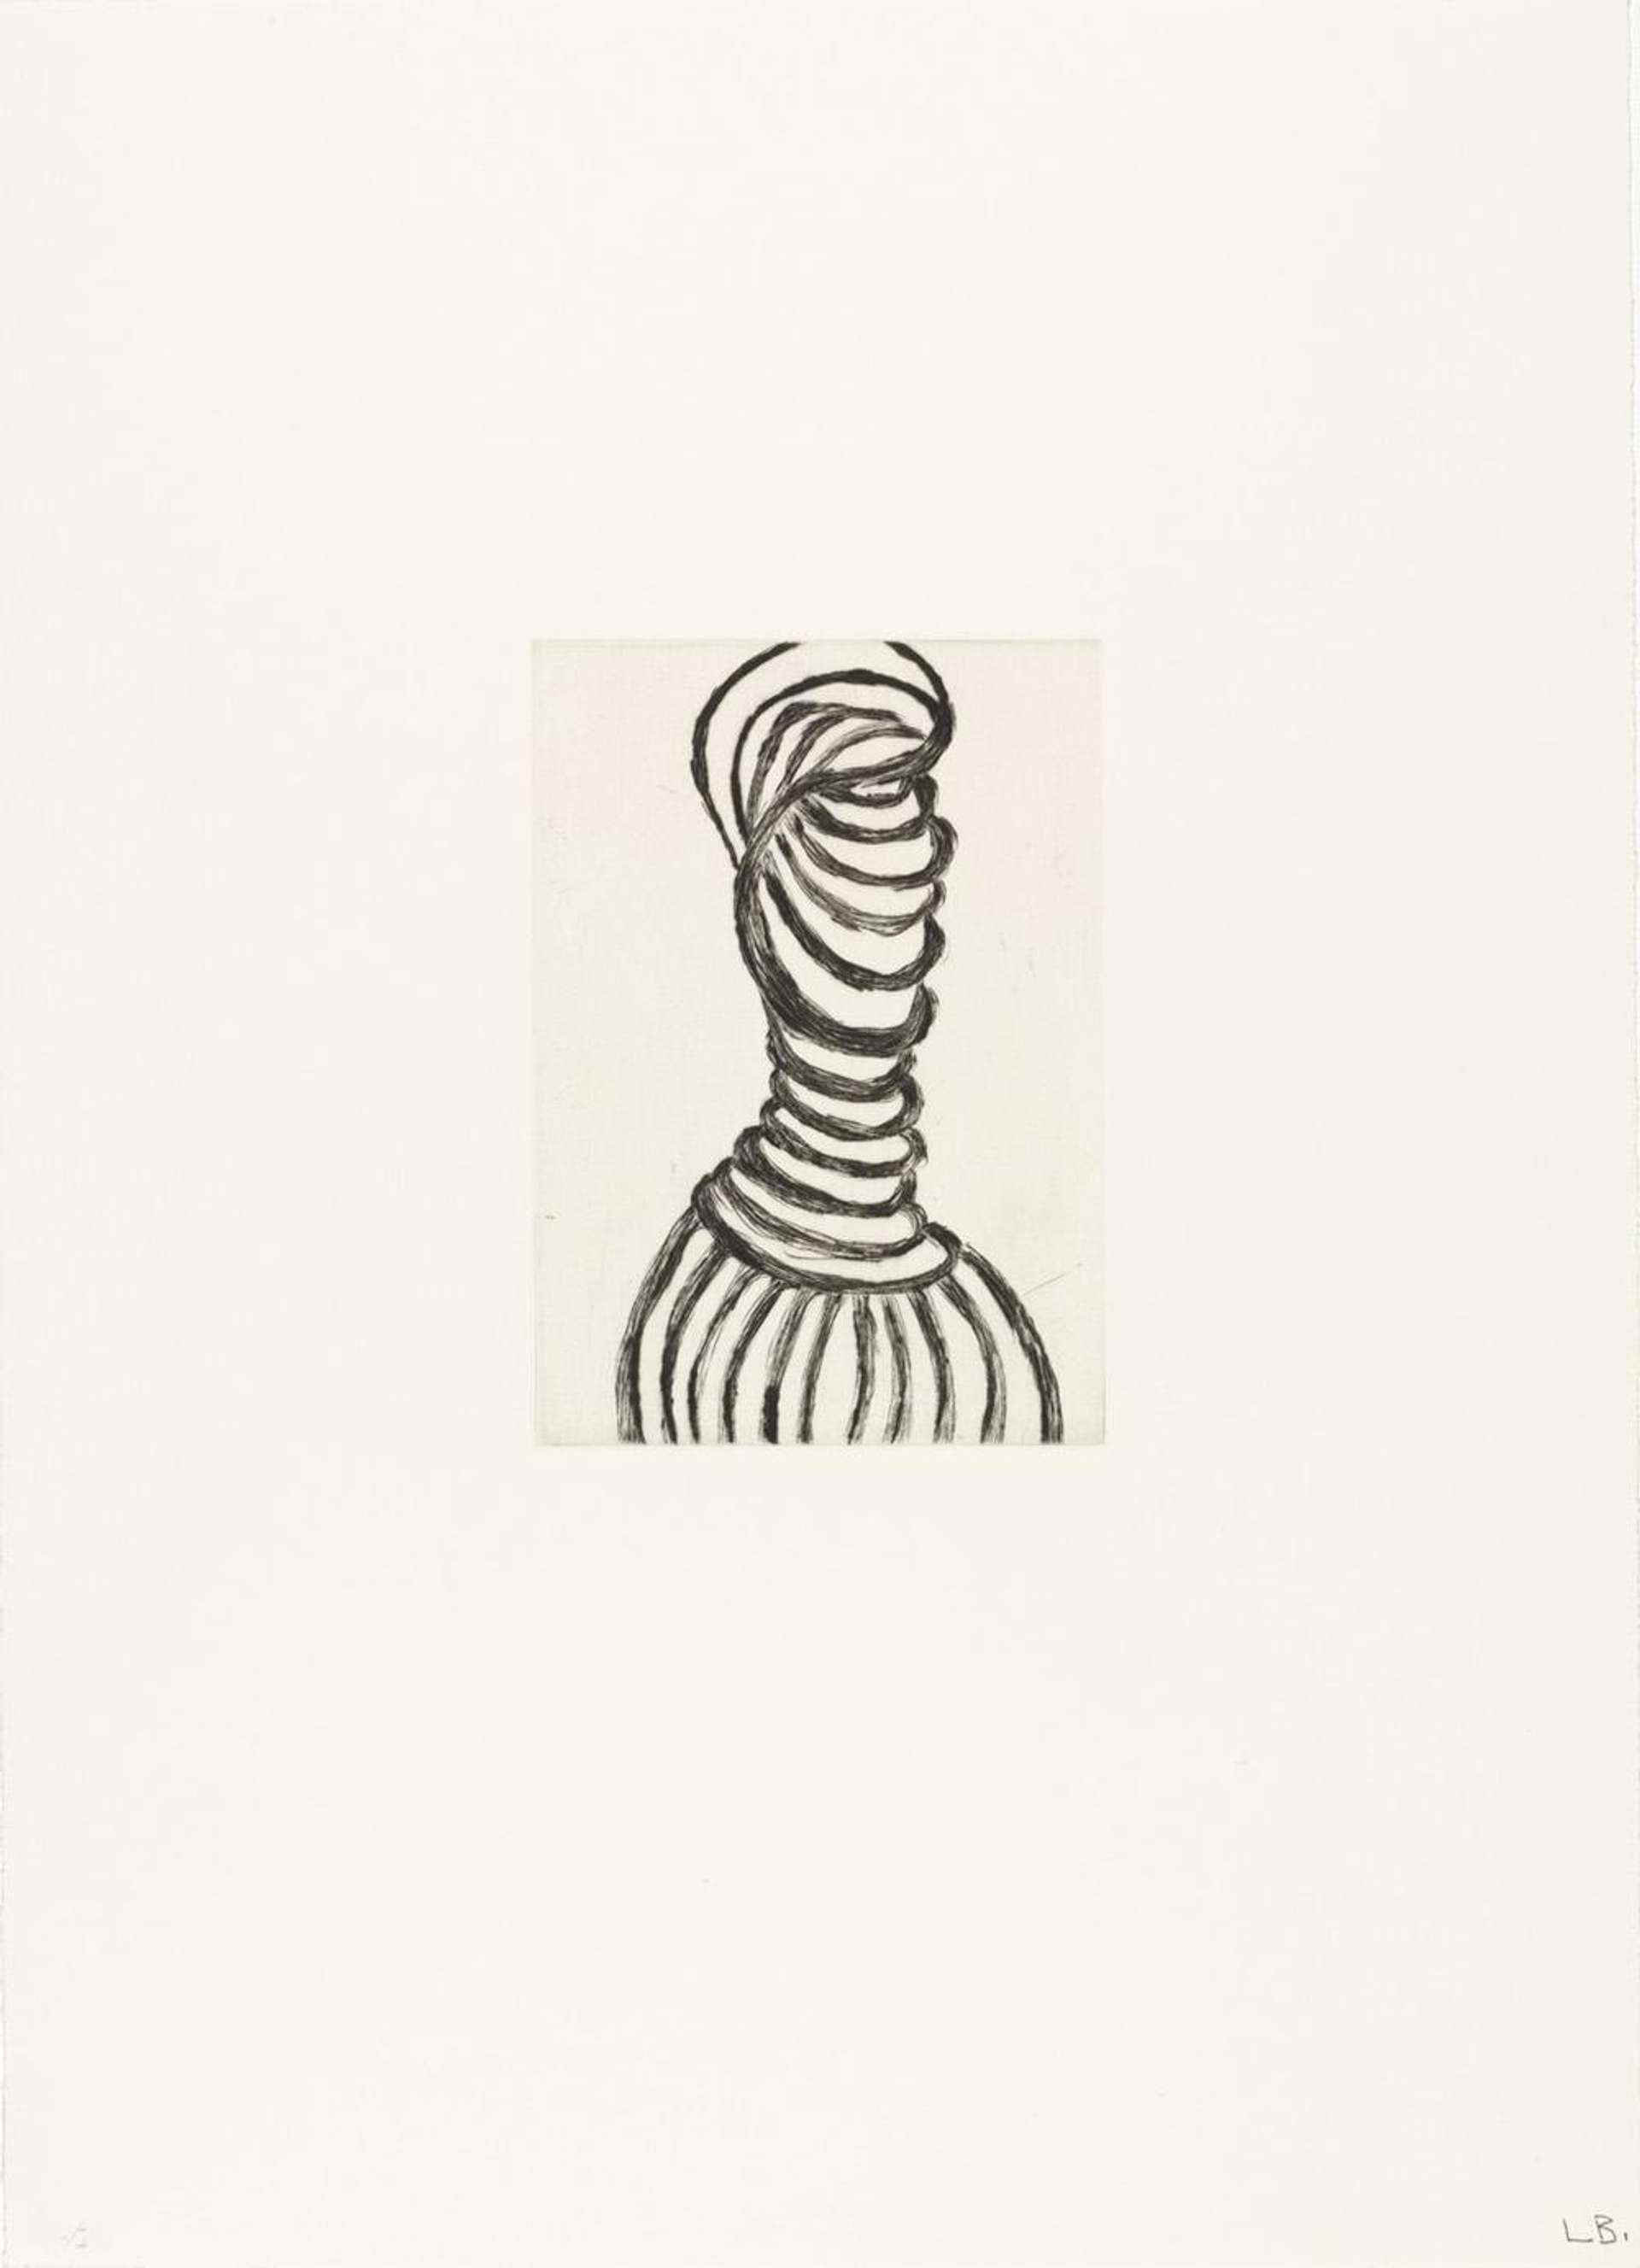 Untitled No. 11 - Signed Print by Louise Bourgeois 1990 - MyArtBroker